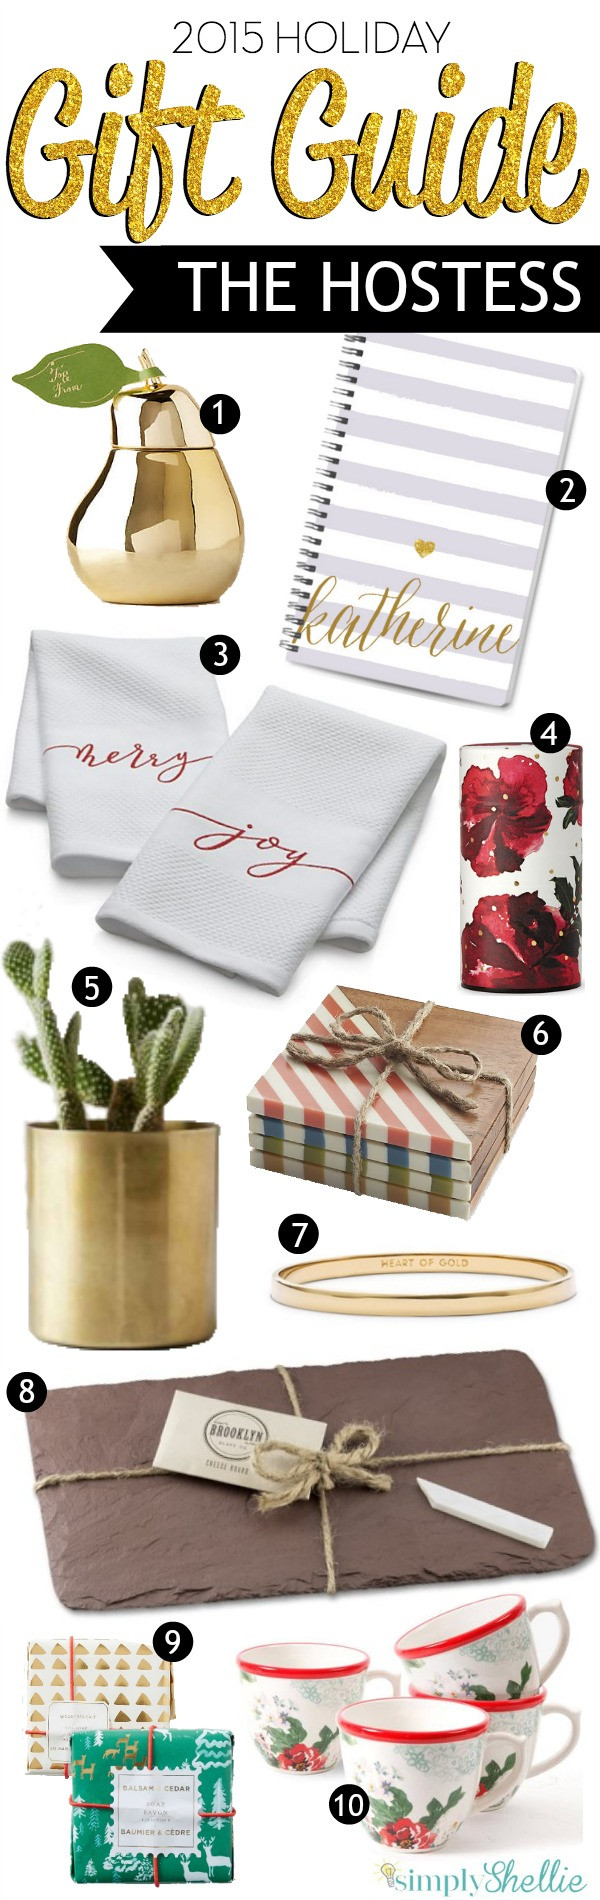 Holiday Party Host Gift Ideas
 Holiday Gift Guide Fabulous Hostess Gift Ideas